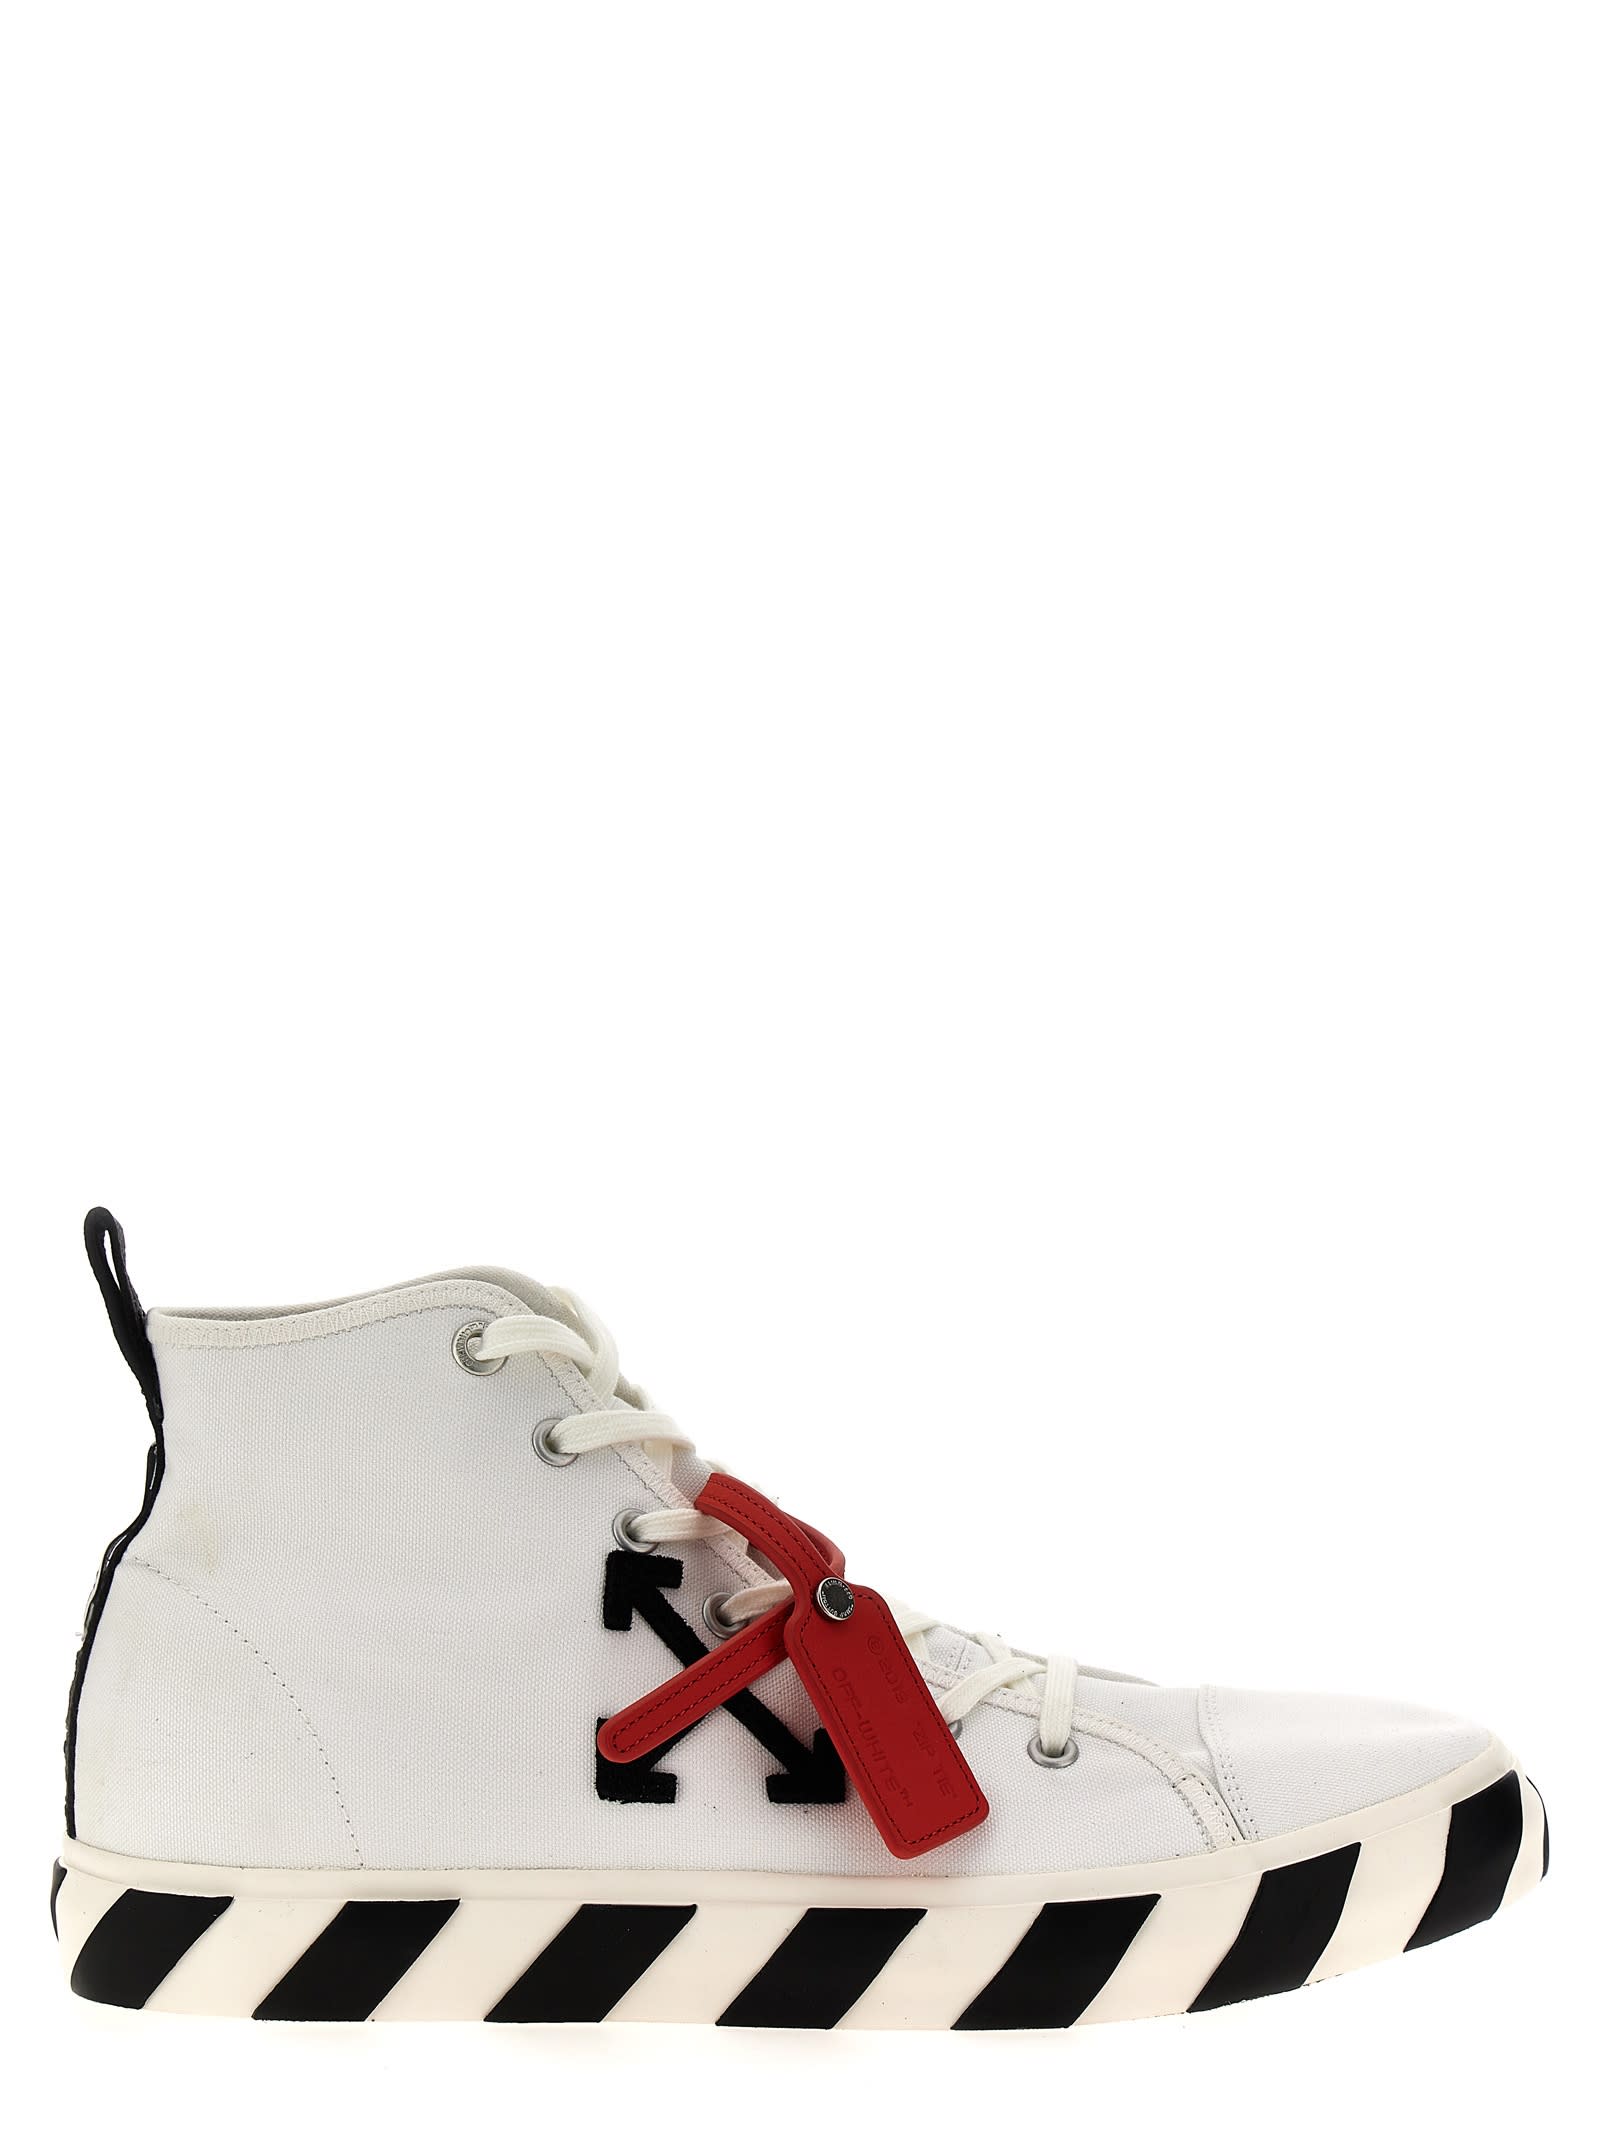 OFF-WHITE MID TOP VULCANIZED SNEAKERS